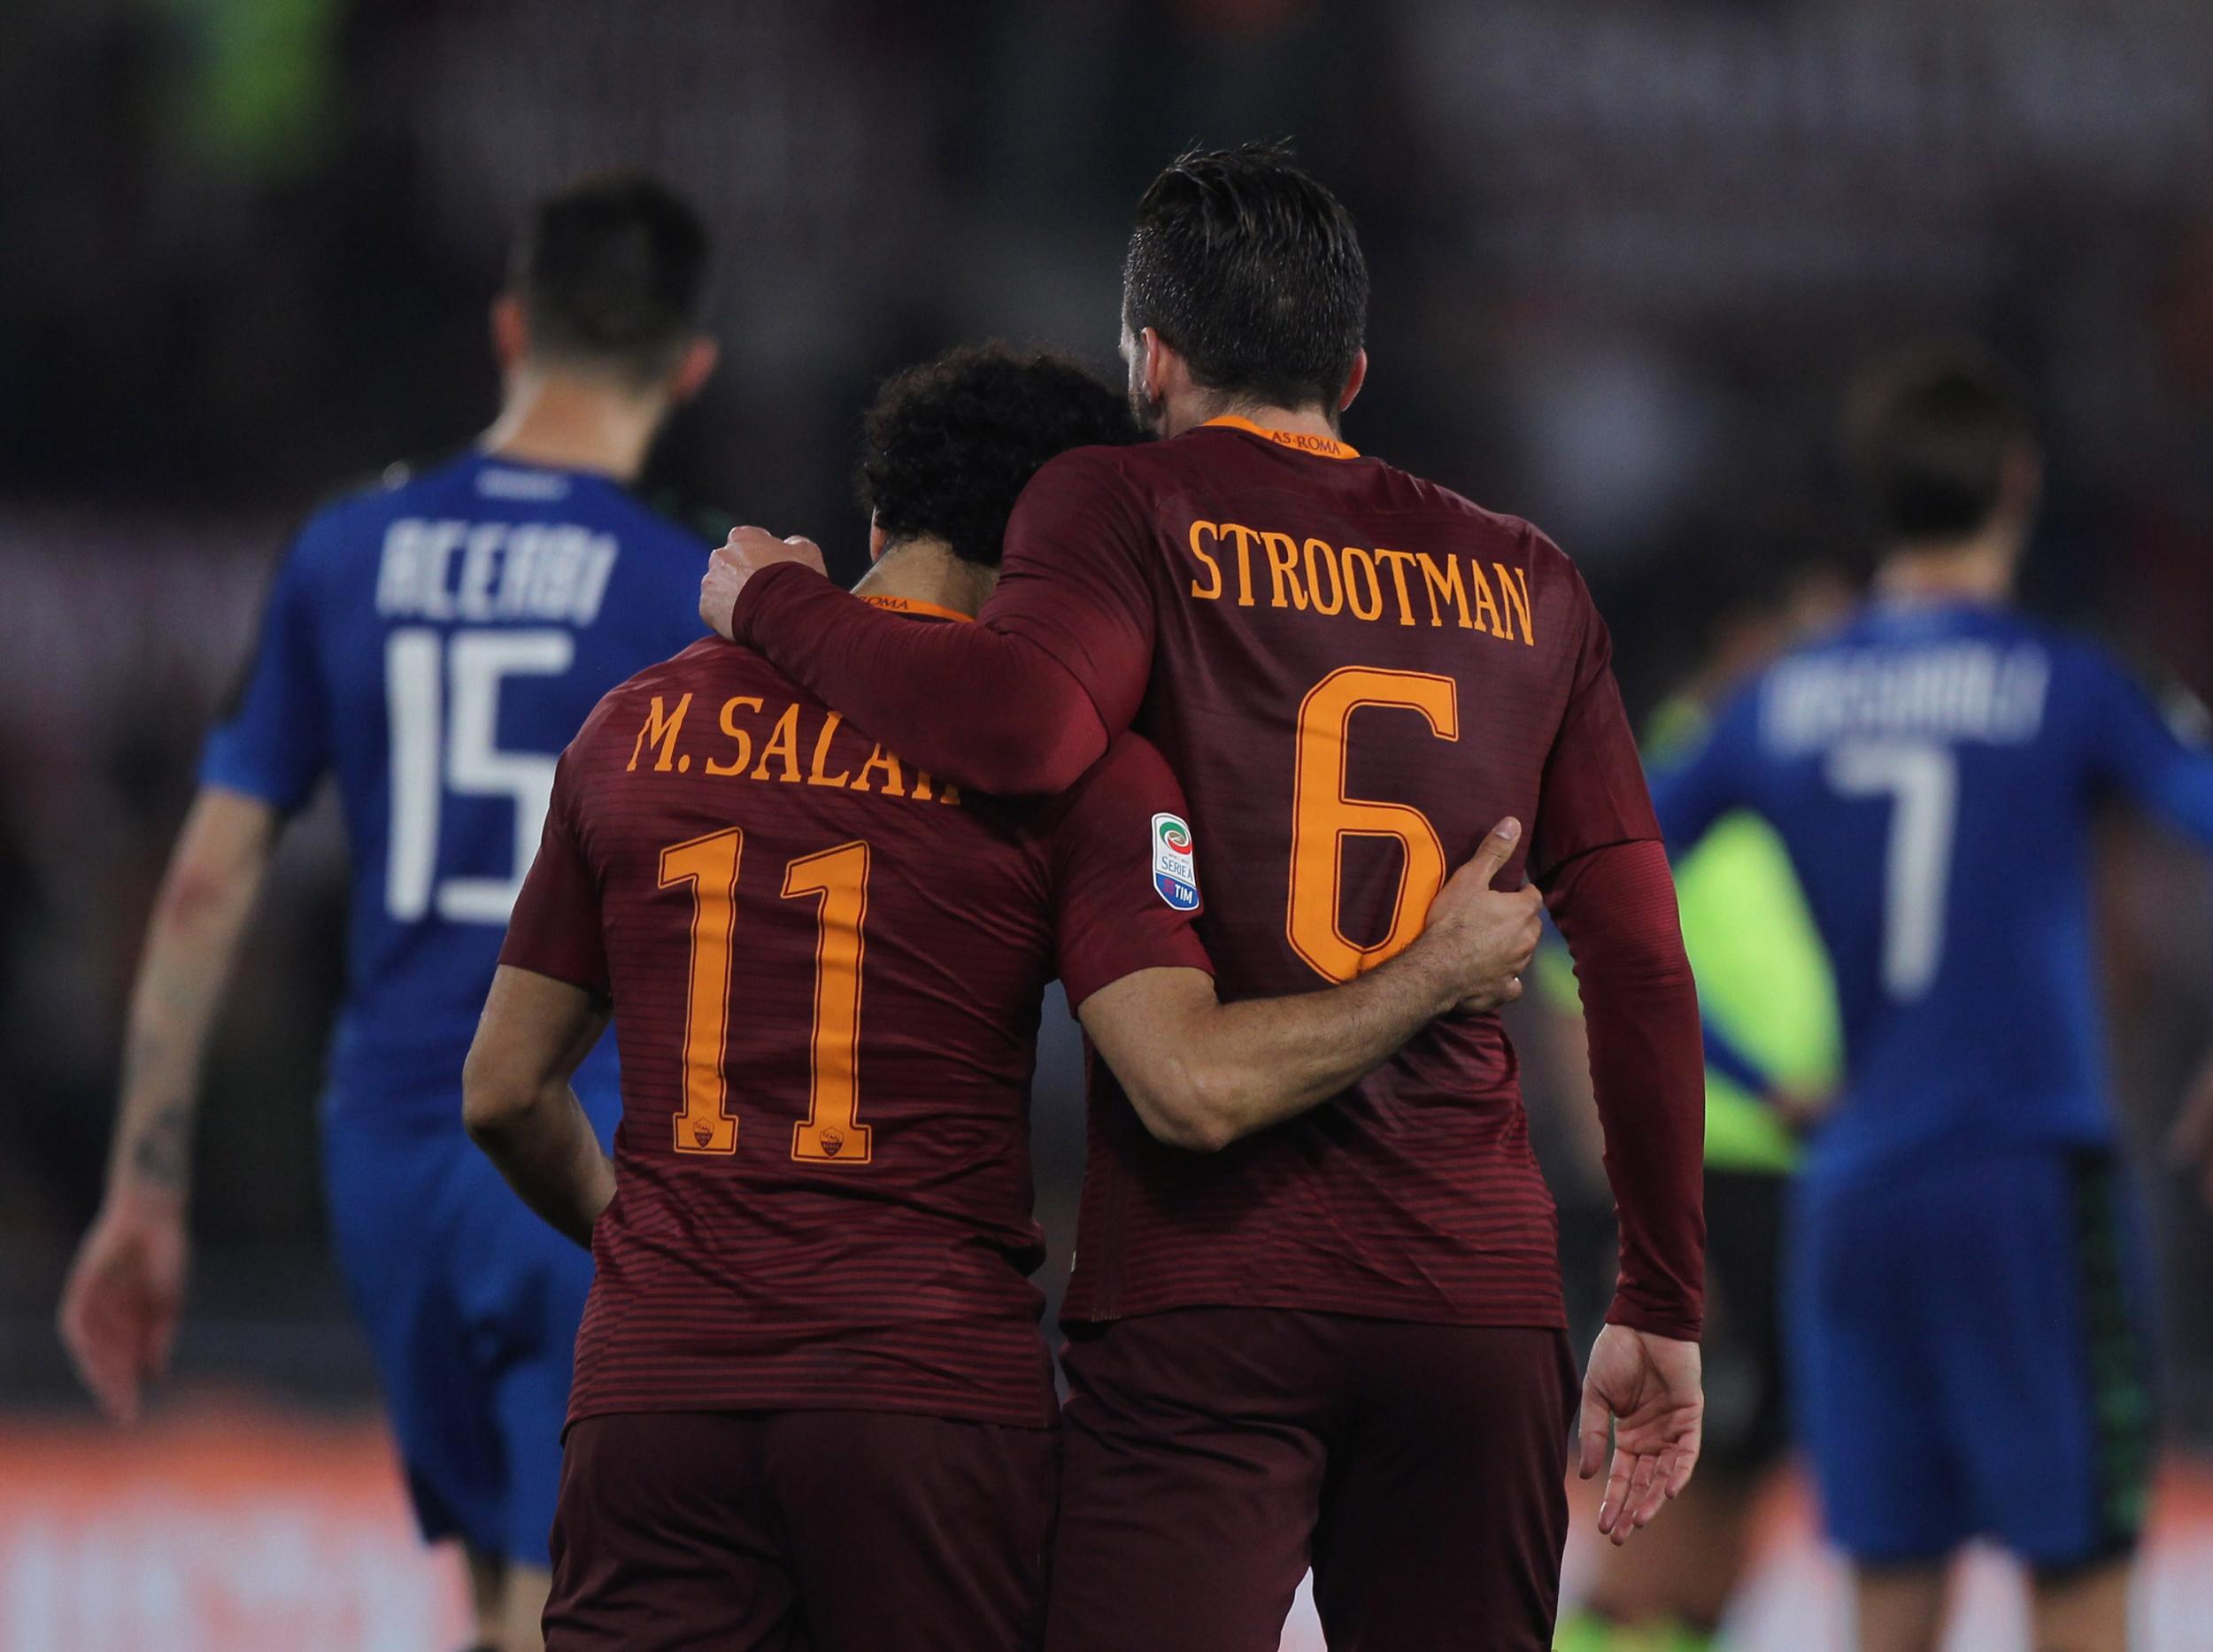 Strootman is surprised by Salah's goals for Liverpool